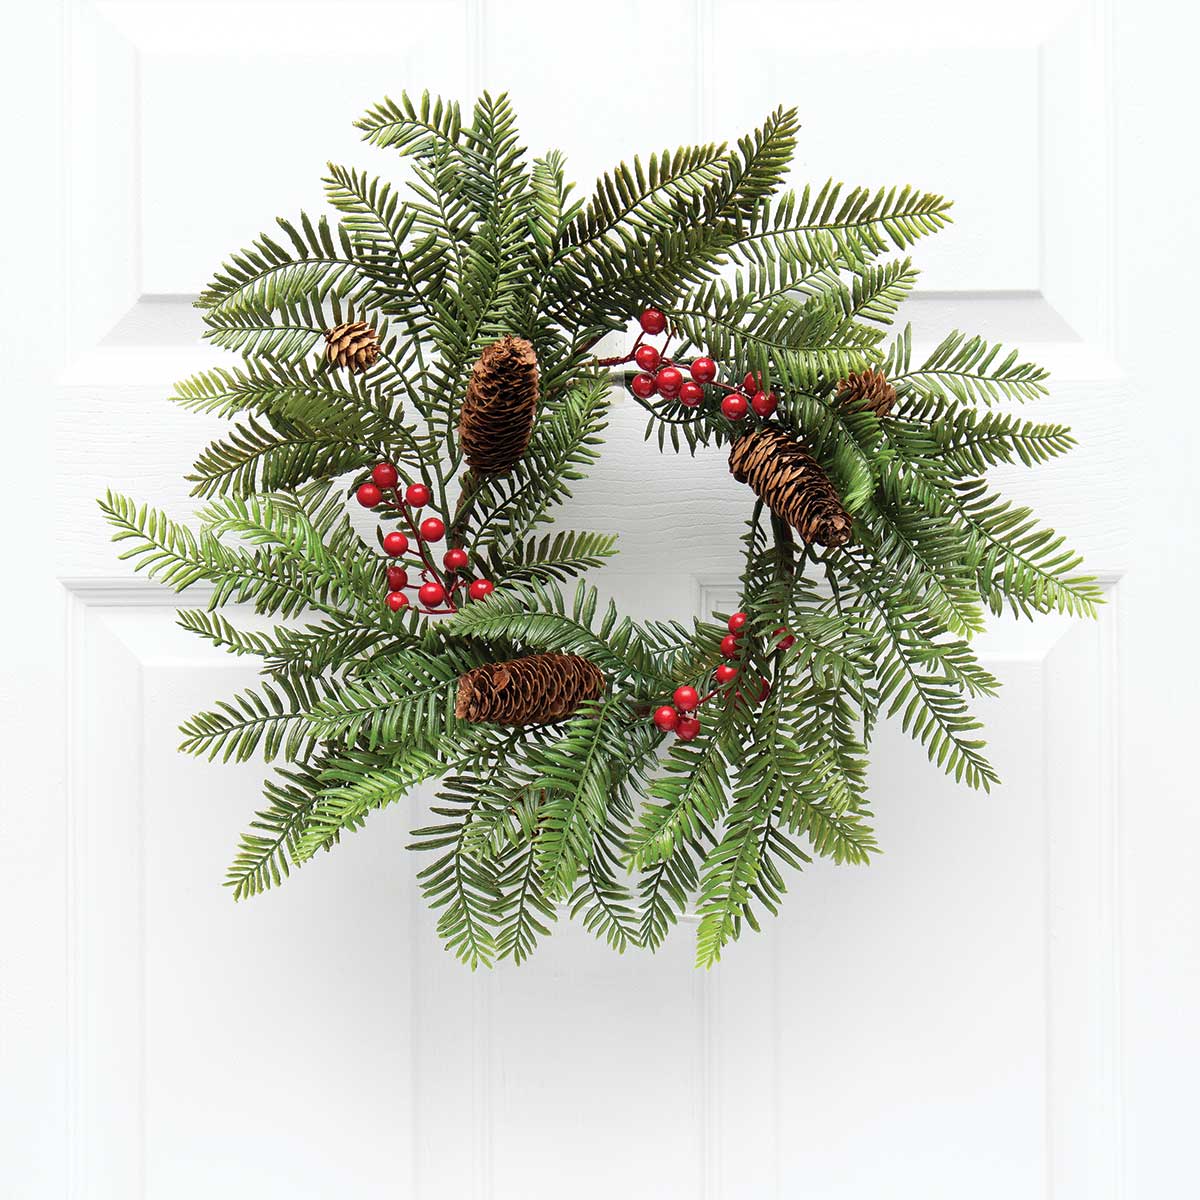 !WILLIAMSBURG PINE CANDLE RING/MINI WREATH WITH RED BERRIES